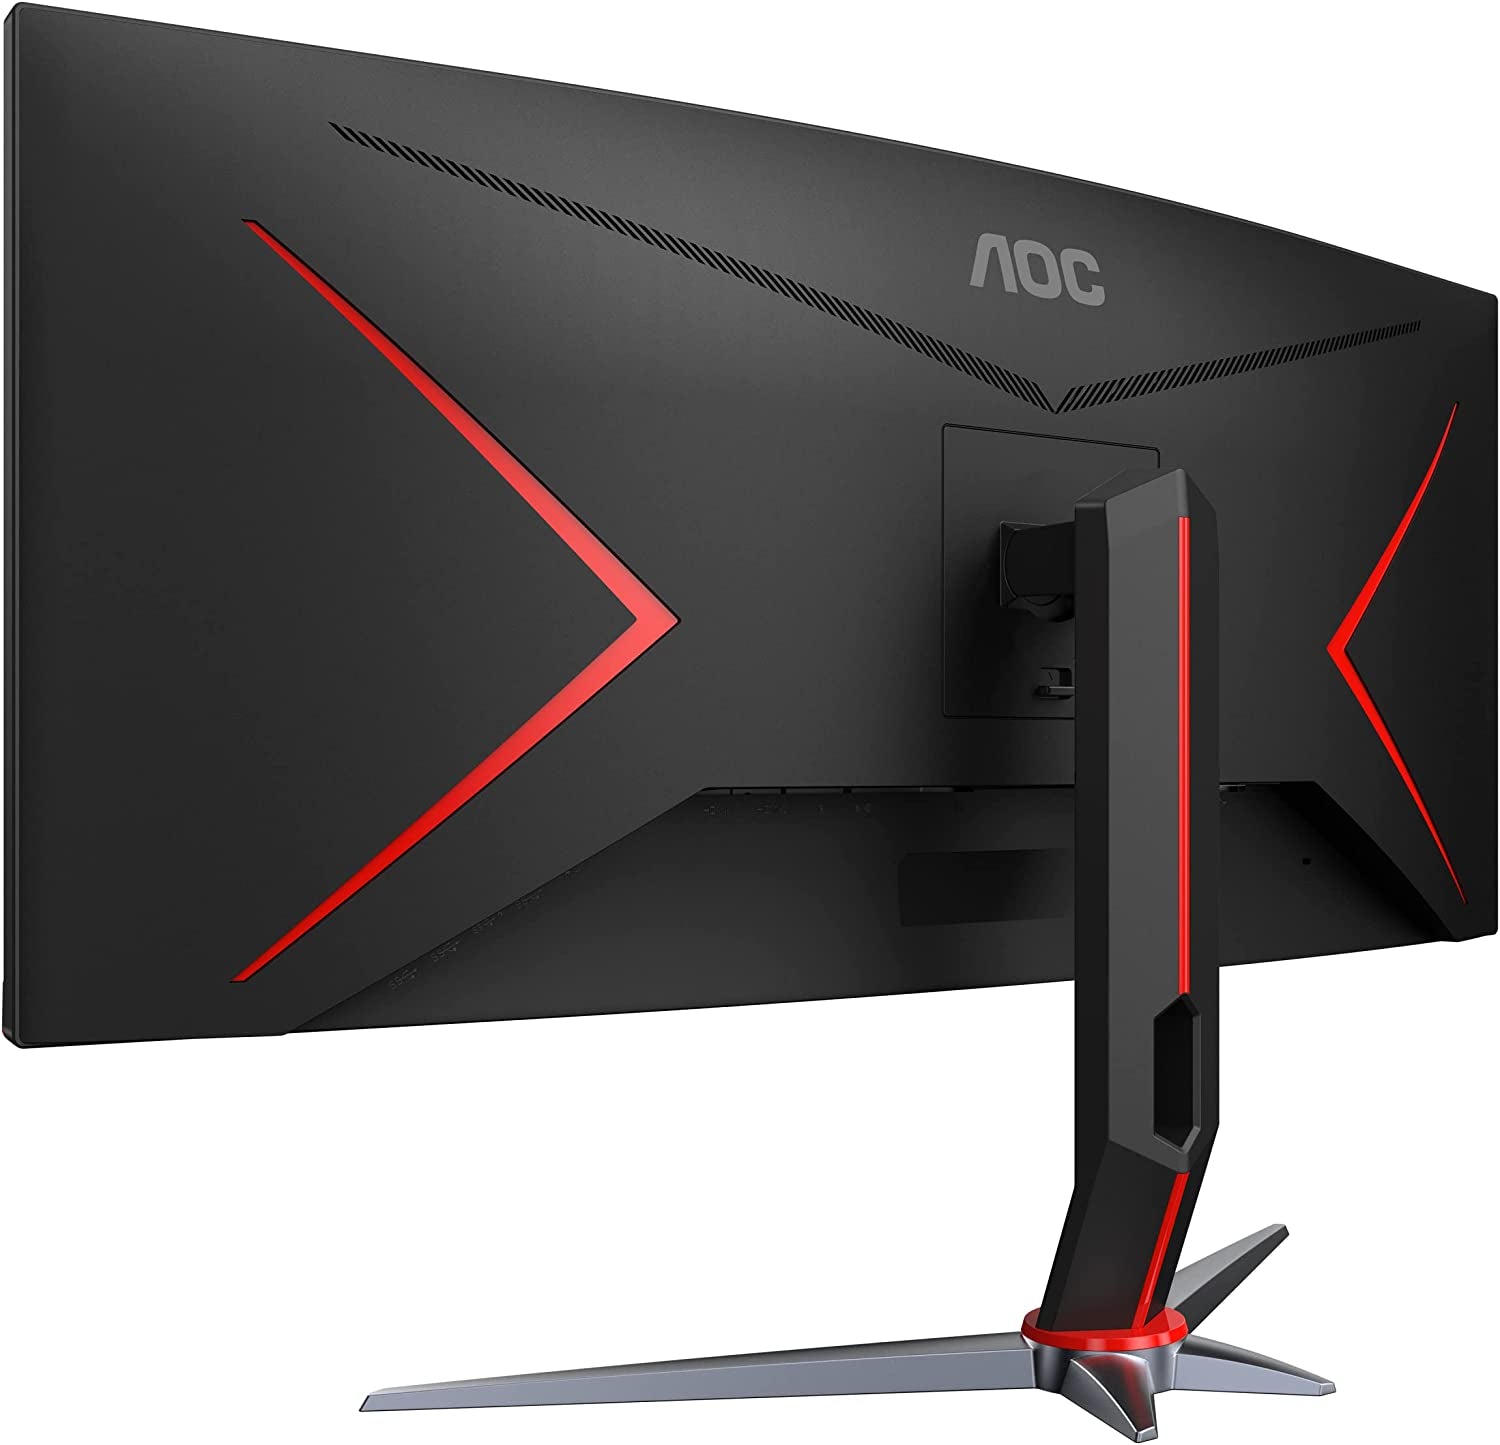 CU34G2X 34" Curved Frameless Immersive Gaming Monitor, Ultrawide QHD 3440X1440, VA Panel, 1Ms 144Hz Adaptive-Sync, Height Adjustable, 3-Yr Zero Dead Pixels, Black/Red